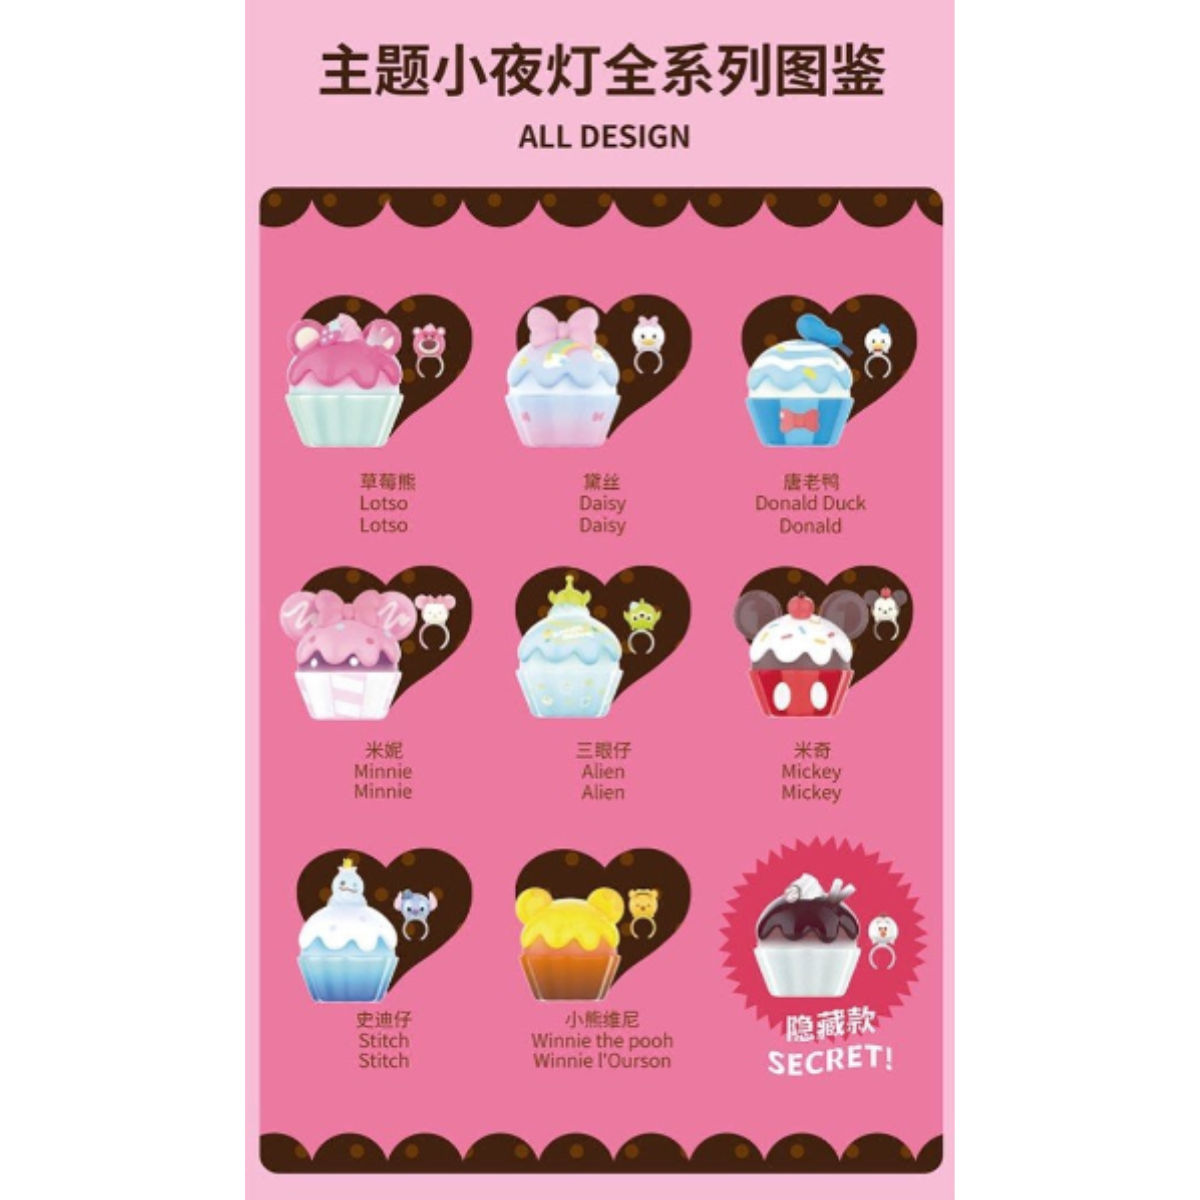 Miniso x Disney Tsum Tsum Characters Cupcake Meet In The Starlight Series-Single Box (Random)-Miniso-Ace Cards & Collectibles